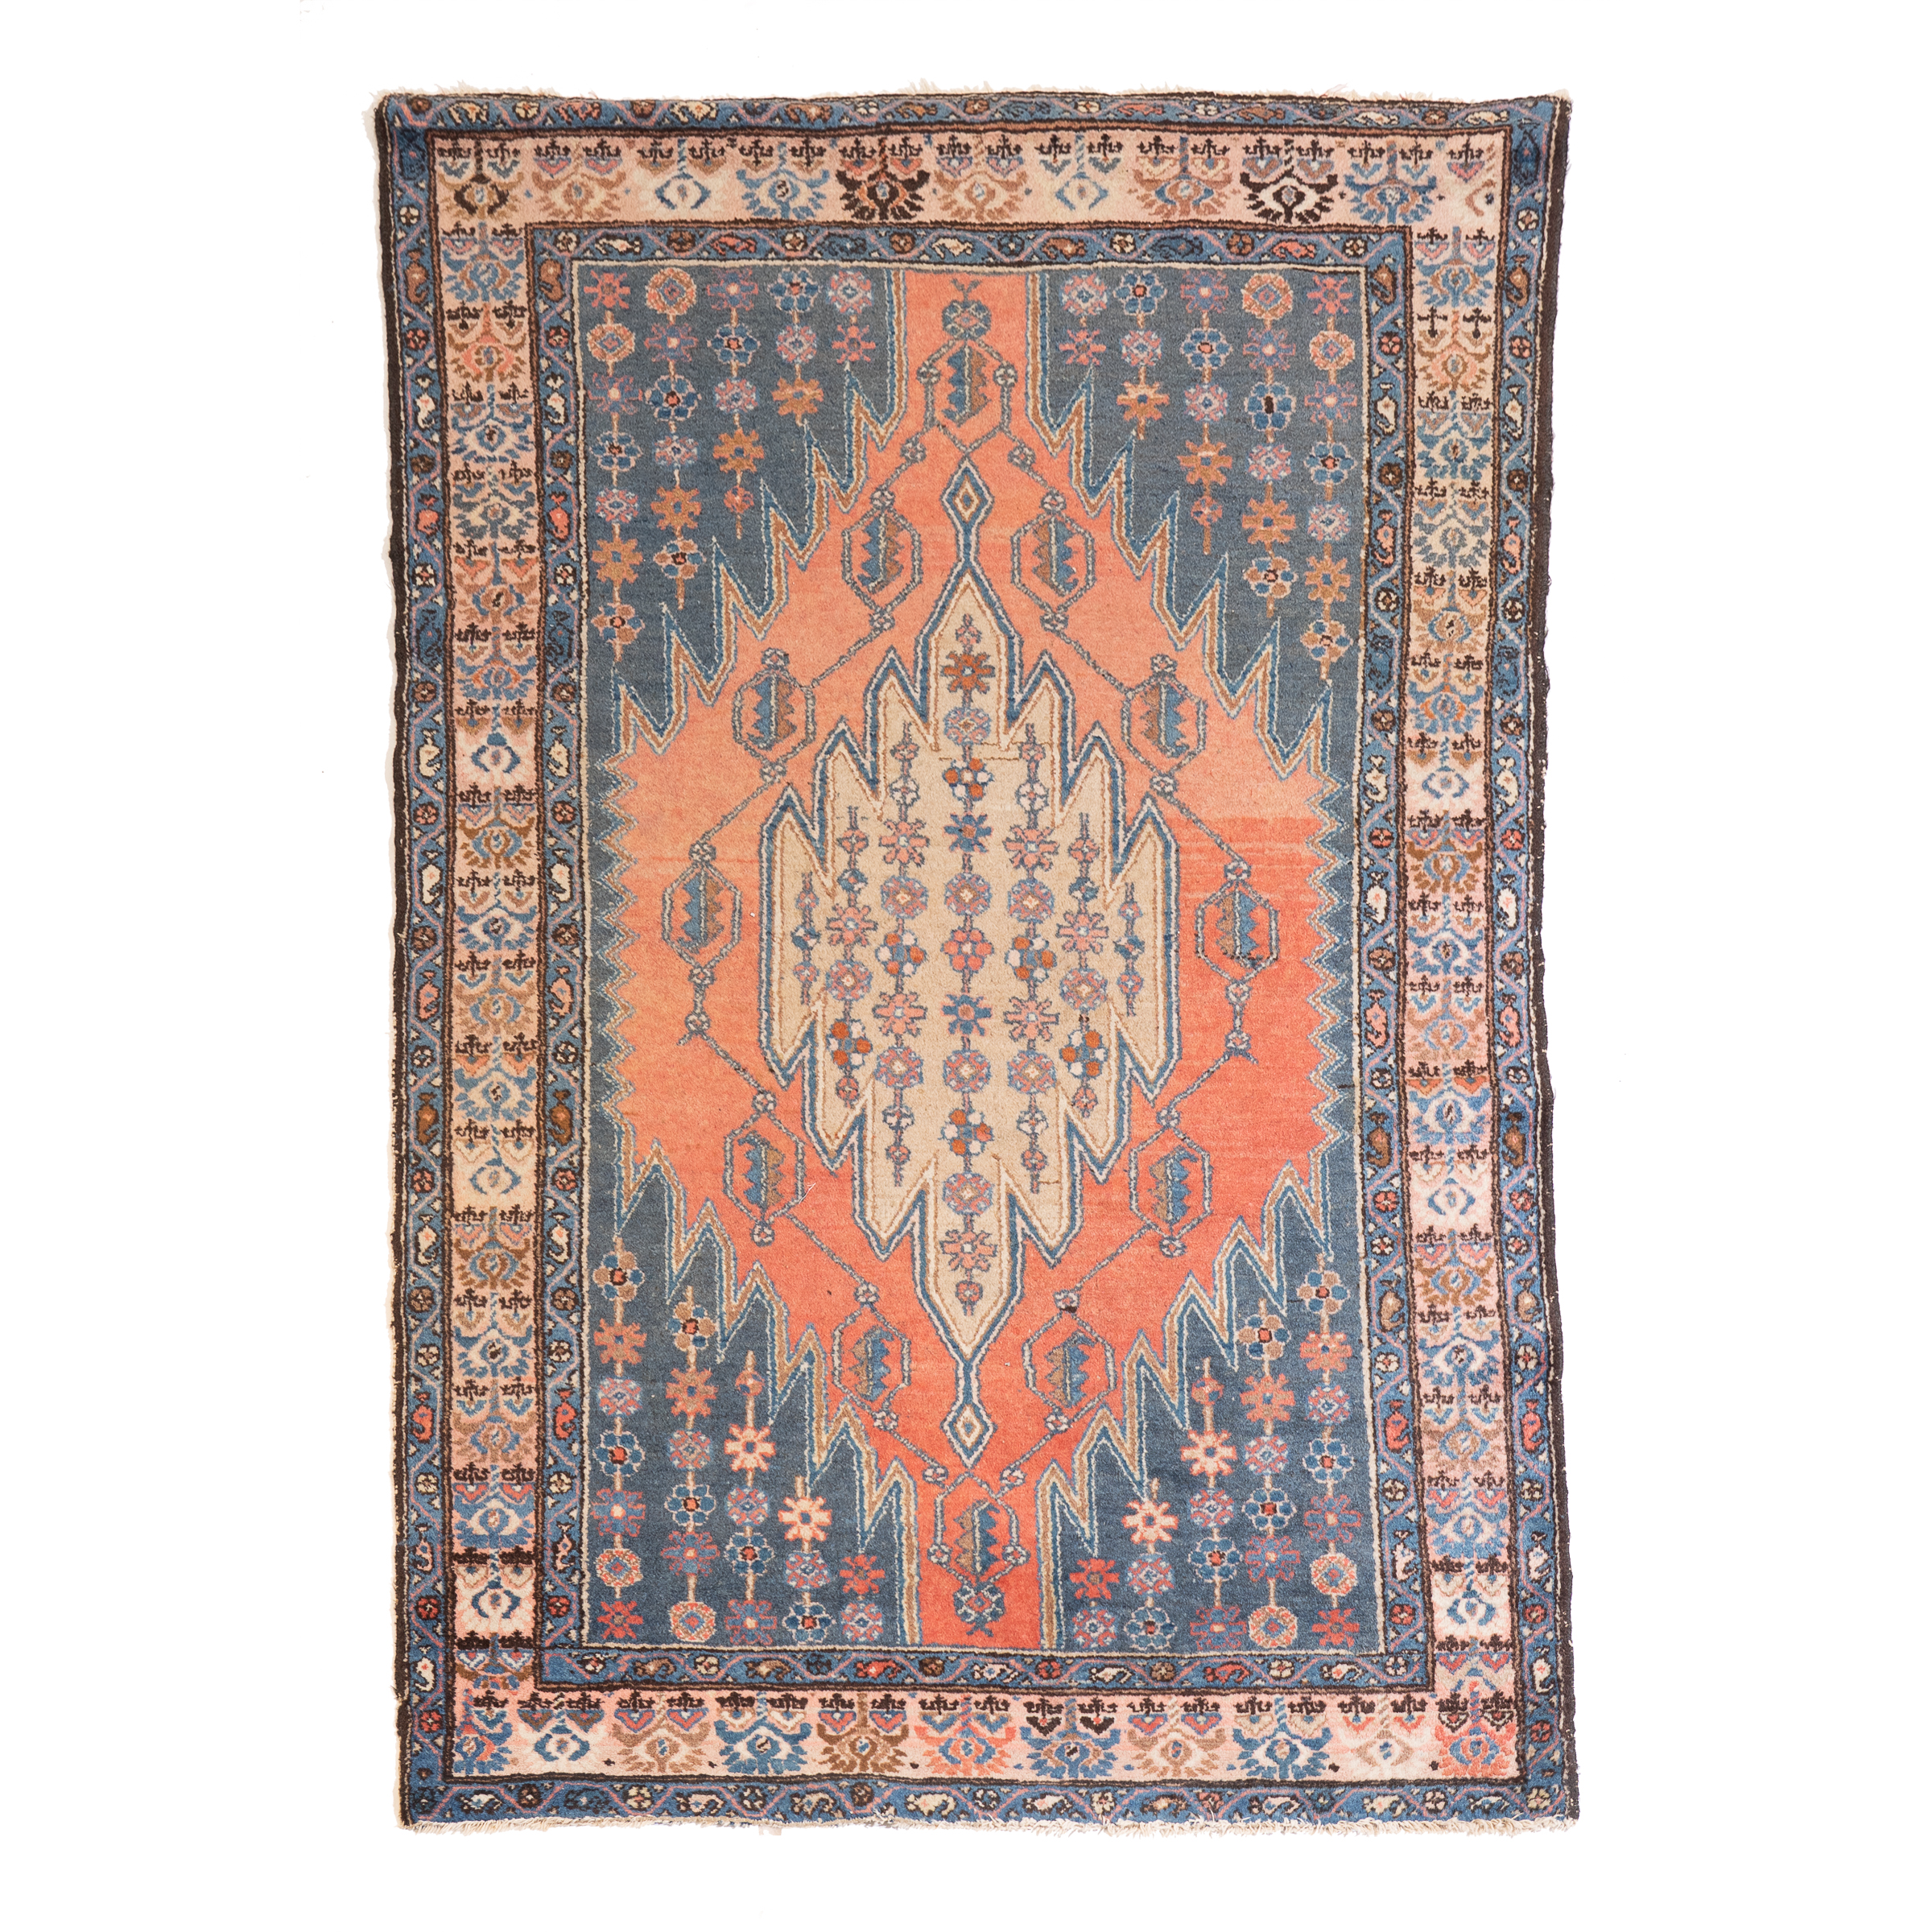 Maslaghan Rug, early to mid 20th century